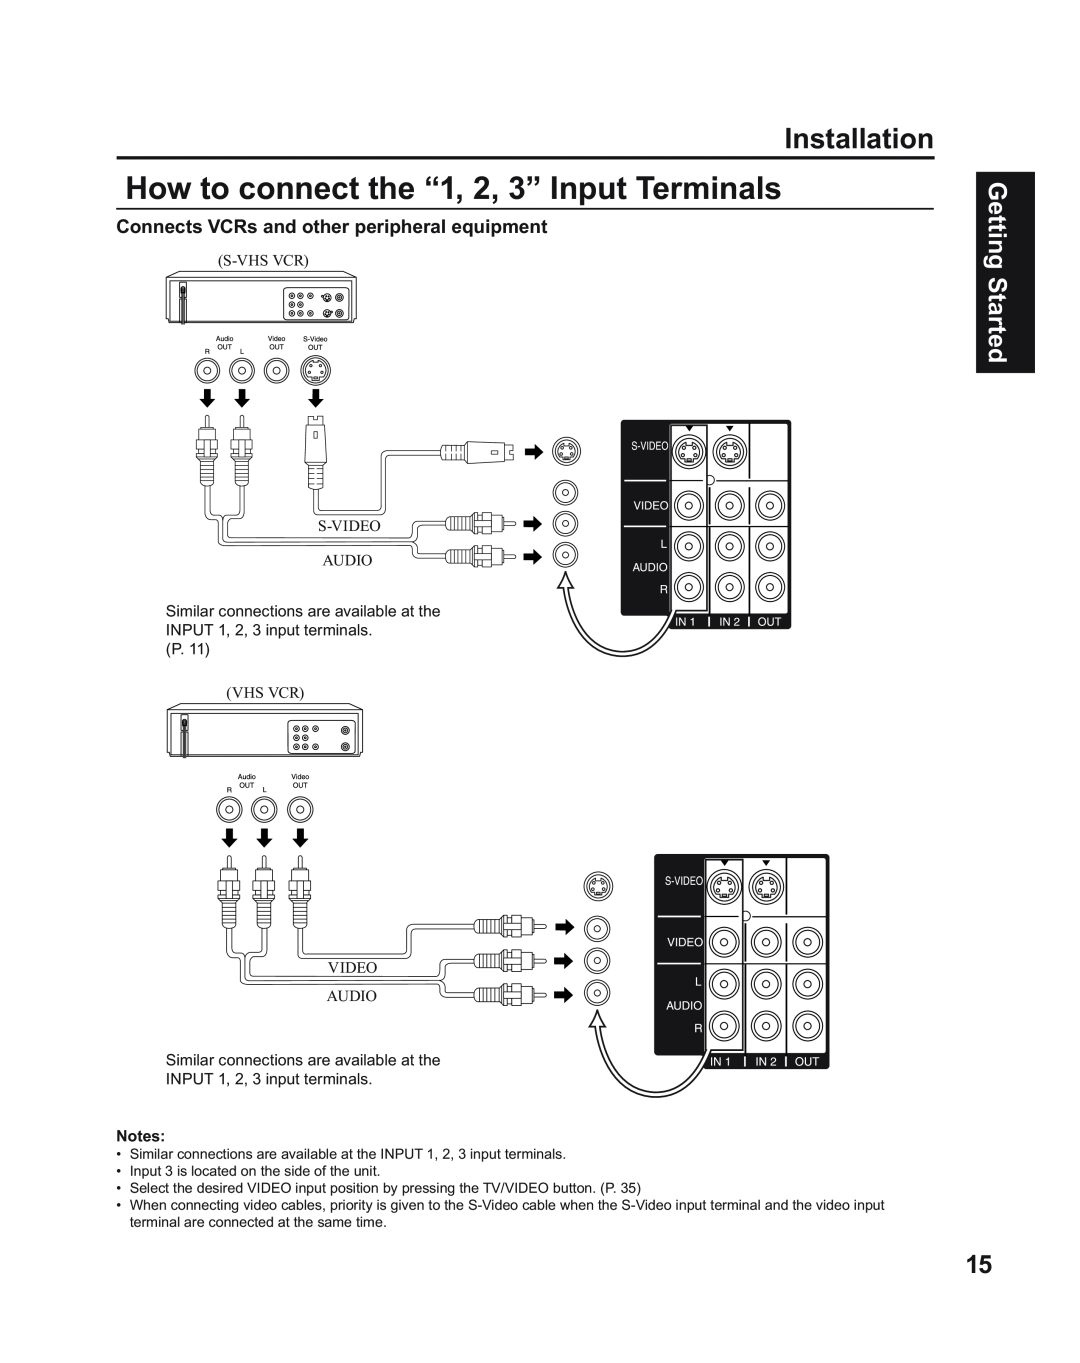 Panasonic PT-43LC14, PT-50LC14 How to connect the “1, 2, 3” Input Terminals, Connects VCRs and other peripheral equipment 